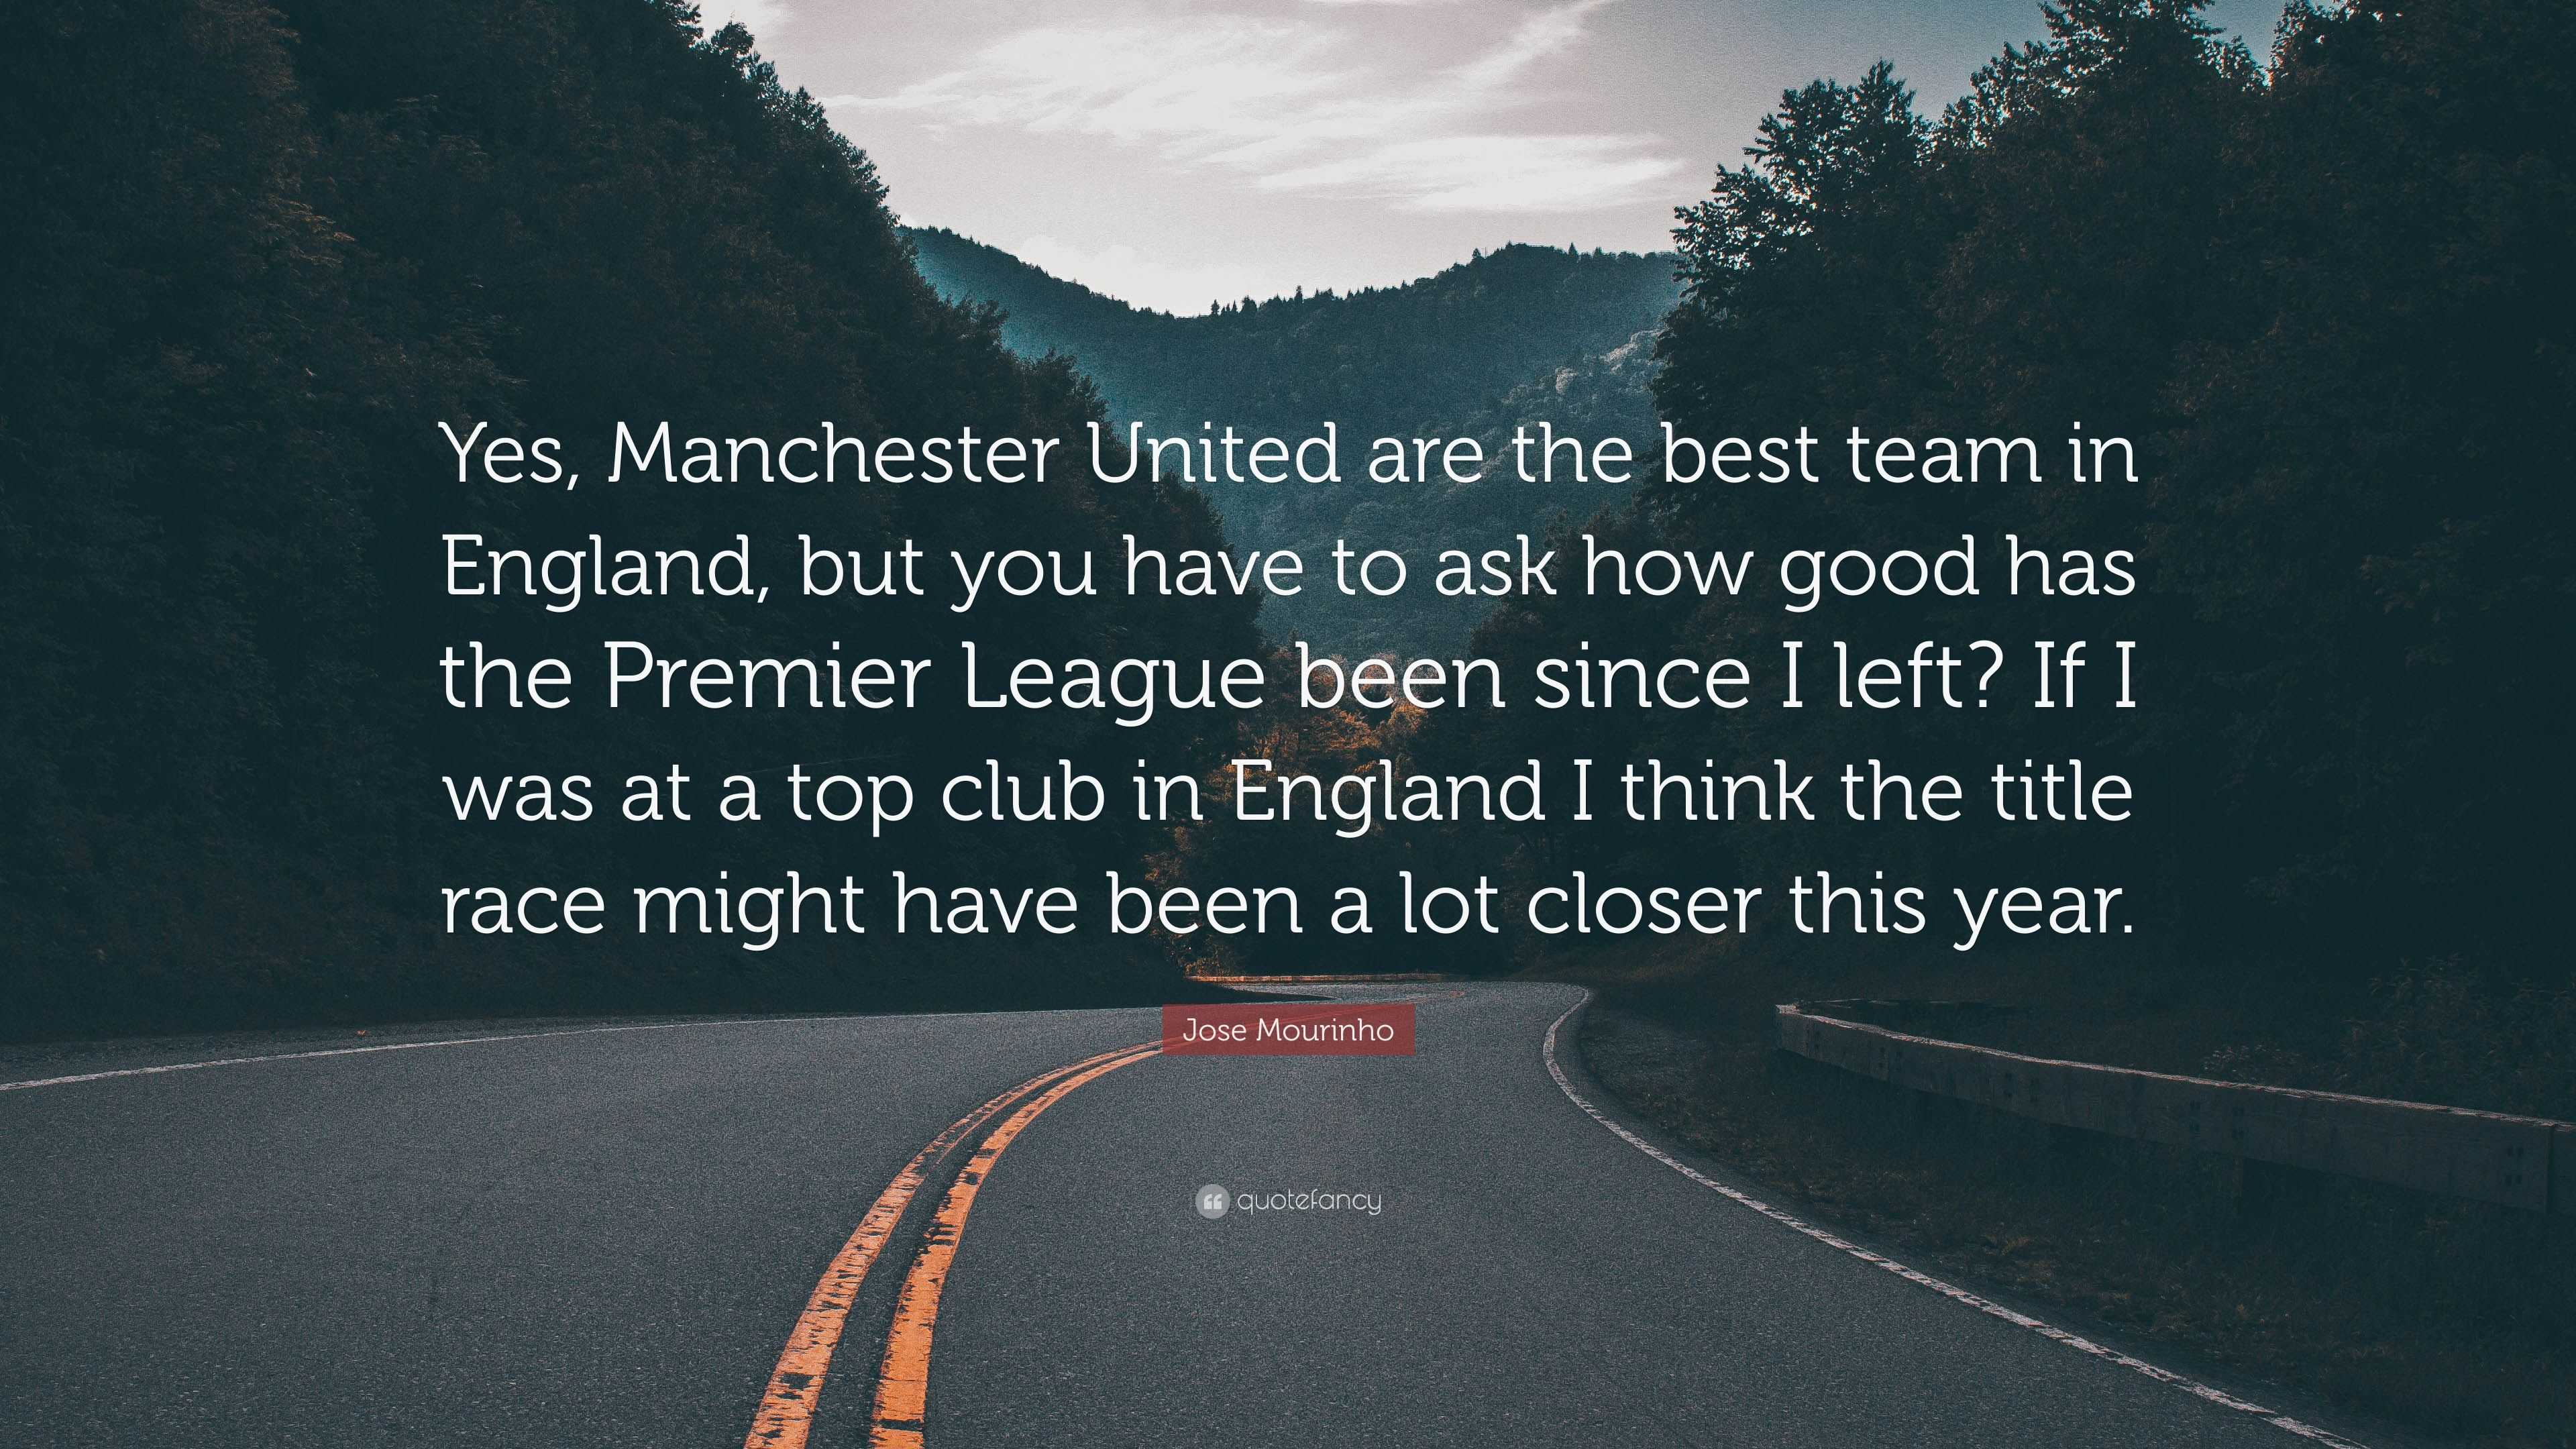 Jose Mourinho Quote: “Yes, Manchester United are the best team in